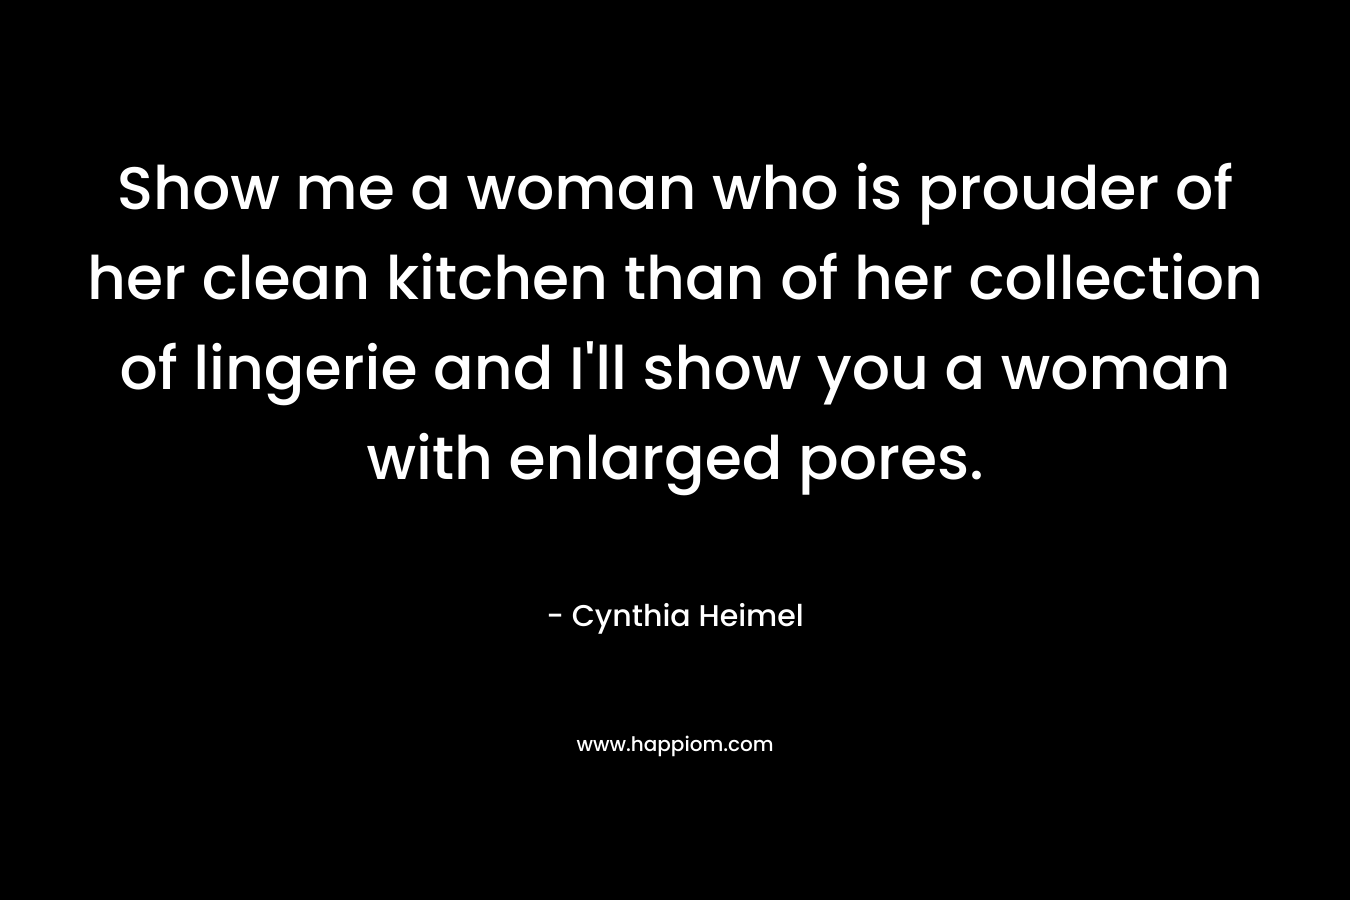 Show me a woman who is prouder of her clean kitchen than of her collection of lingerie and I’ll show you a woman with enlarged pores. – Cynthia Heimel